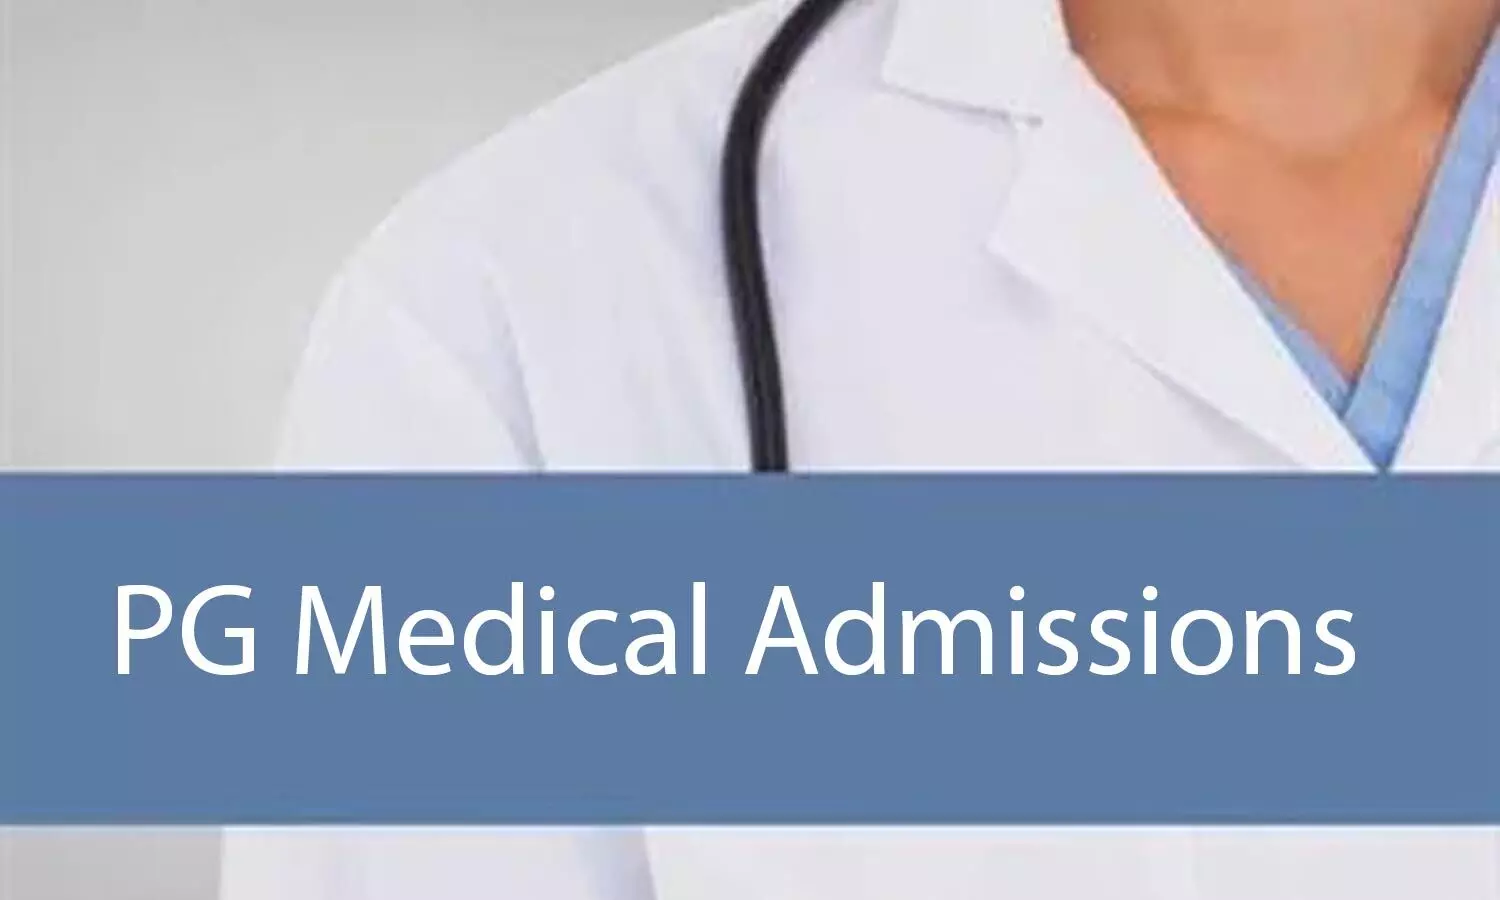 DMER Haryana Notifies On NRI Quota For PG Medical Admissions 2021